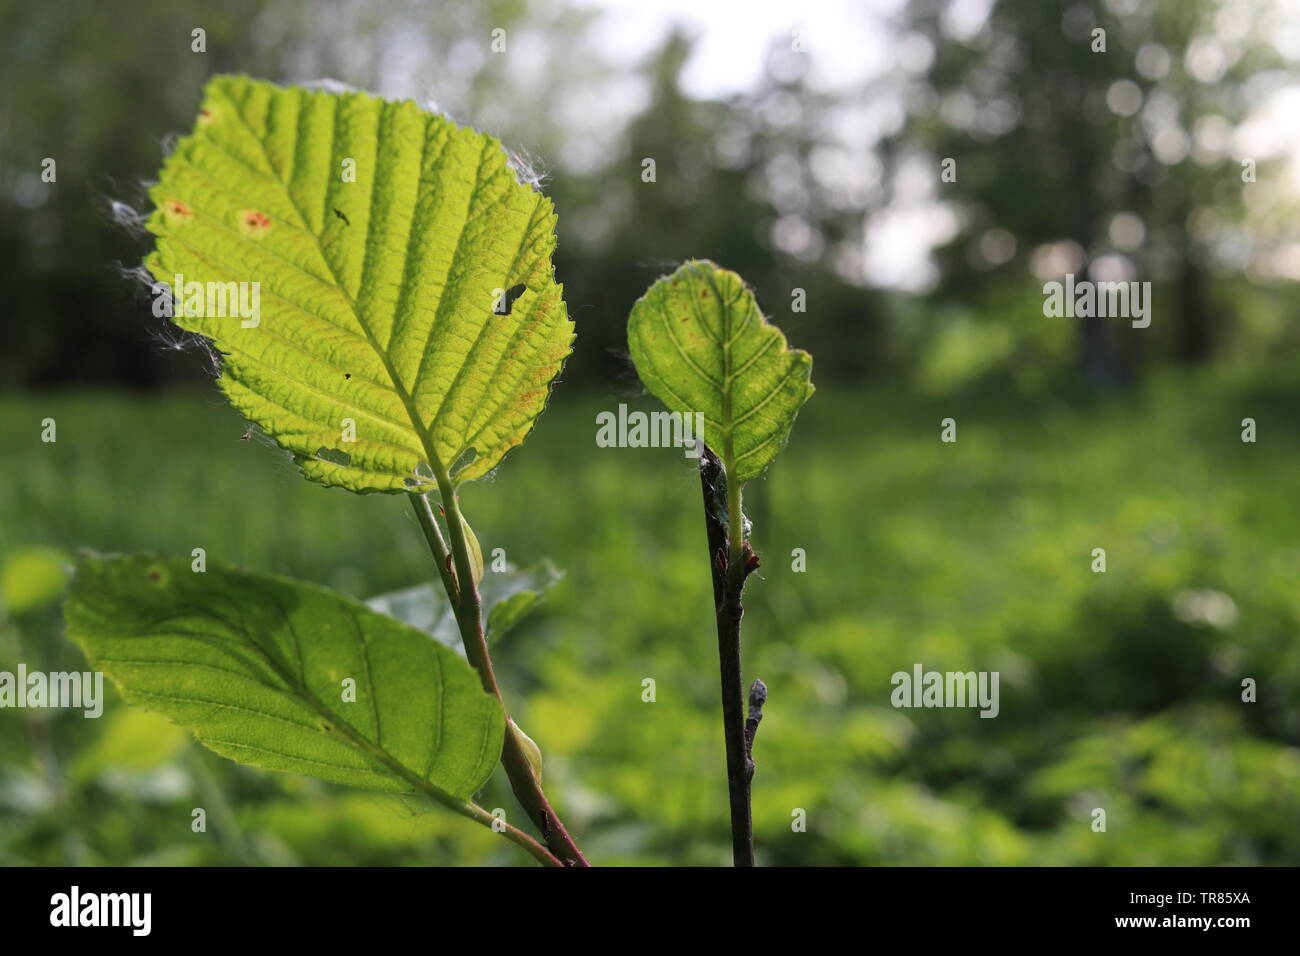 A close-up of a young tree branch reaching up. Stock Photo